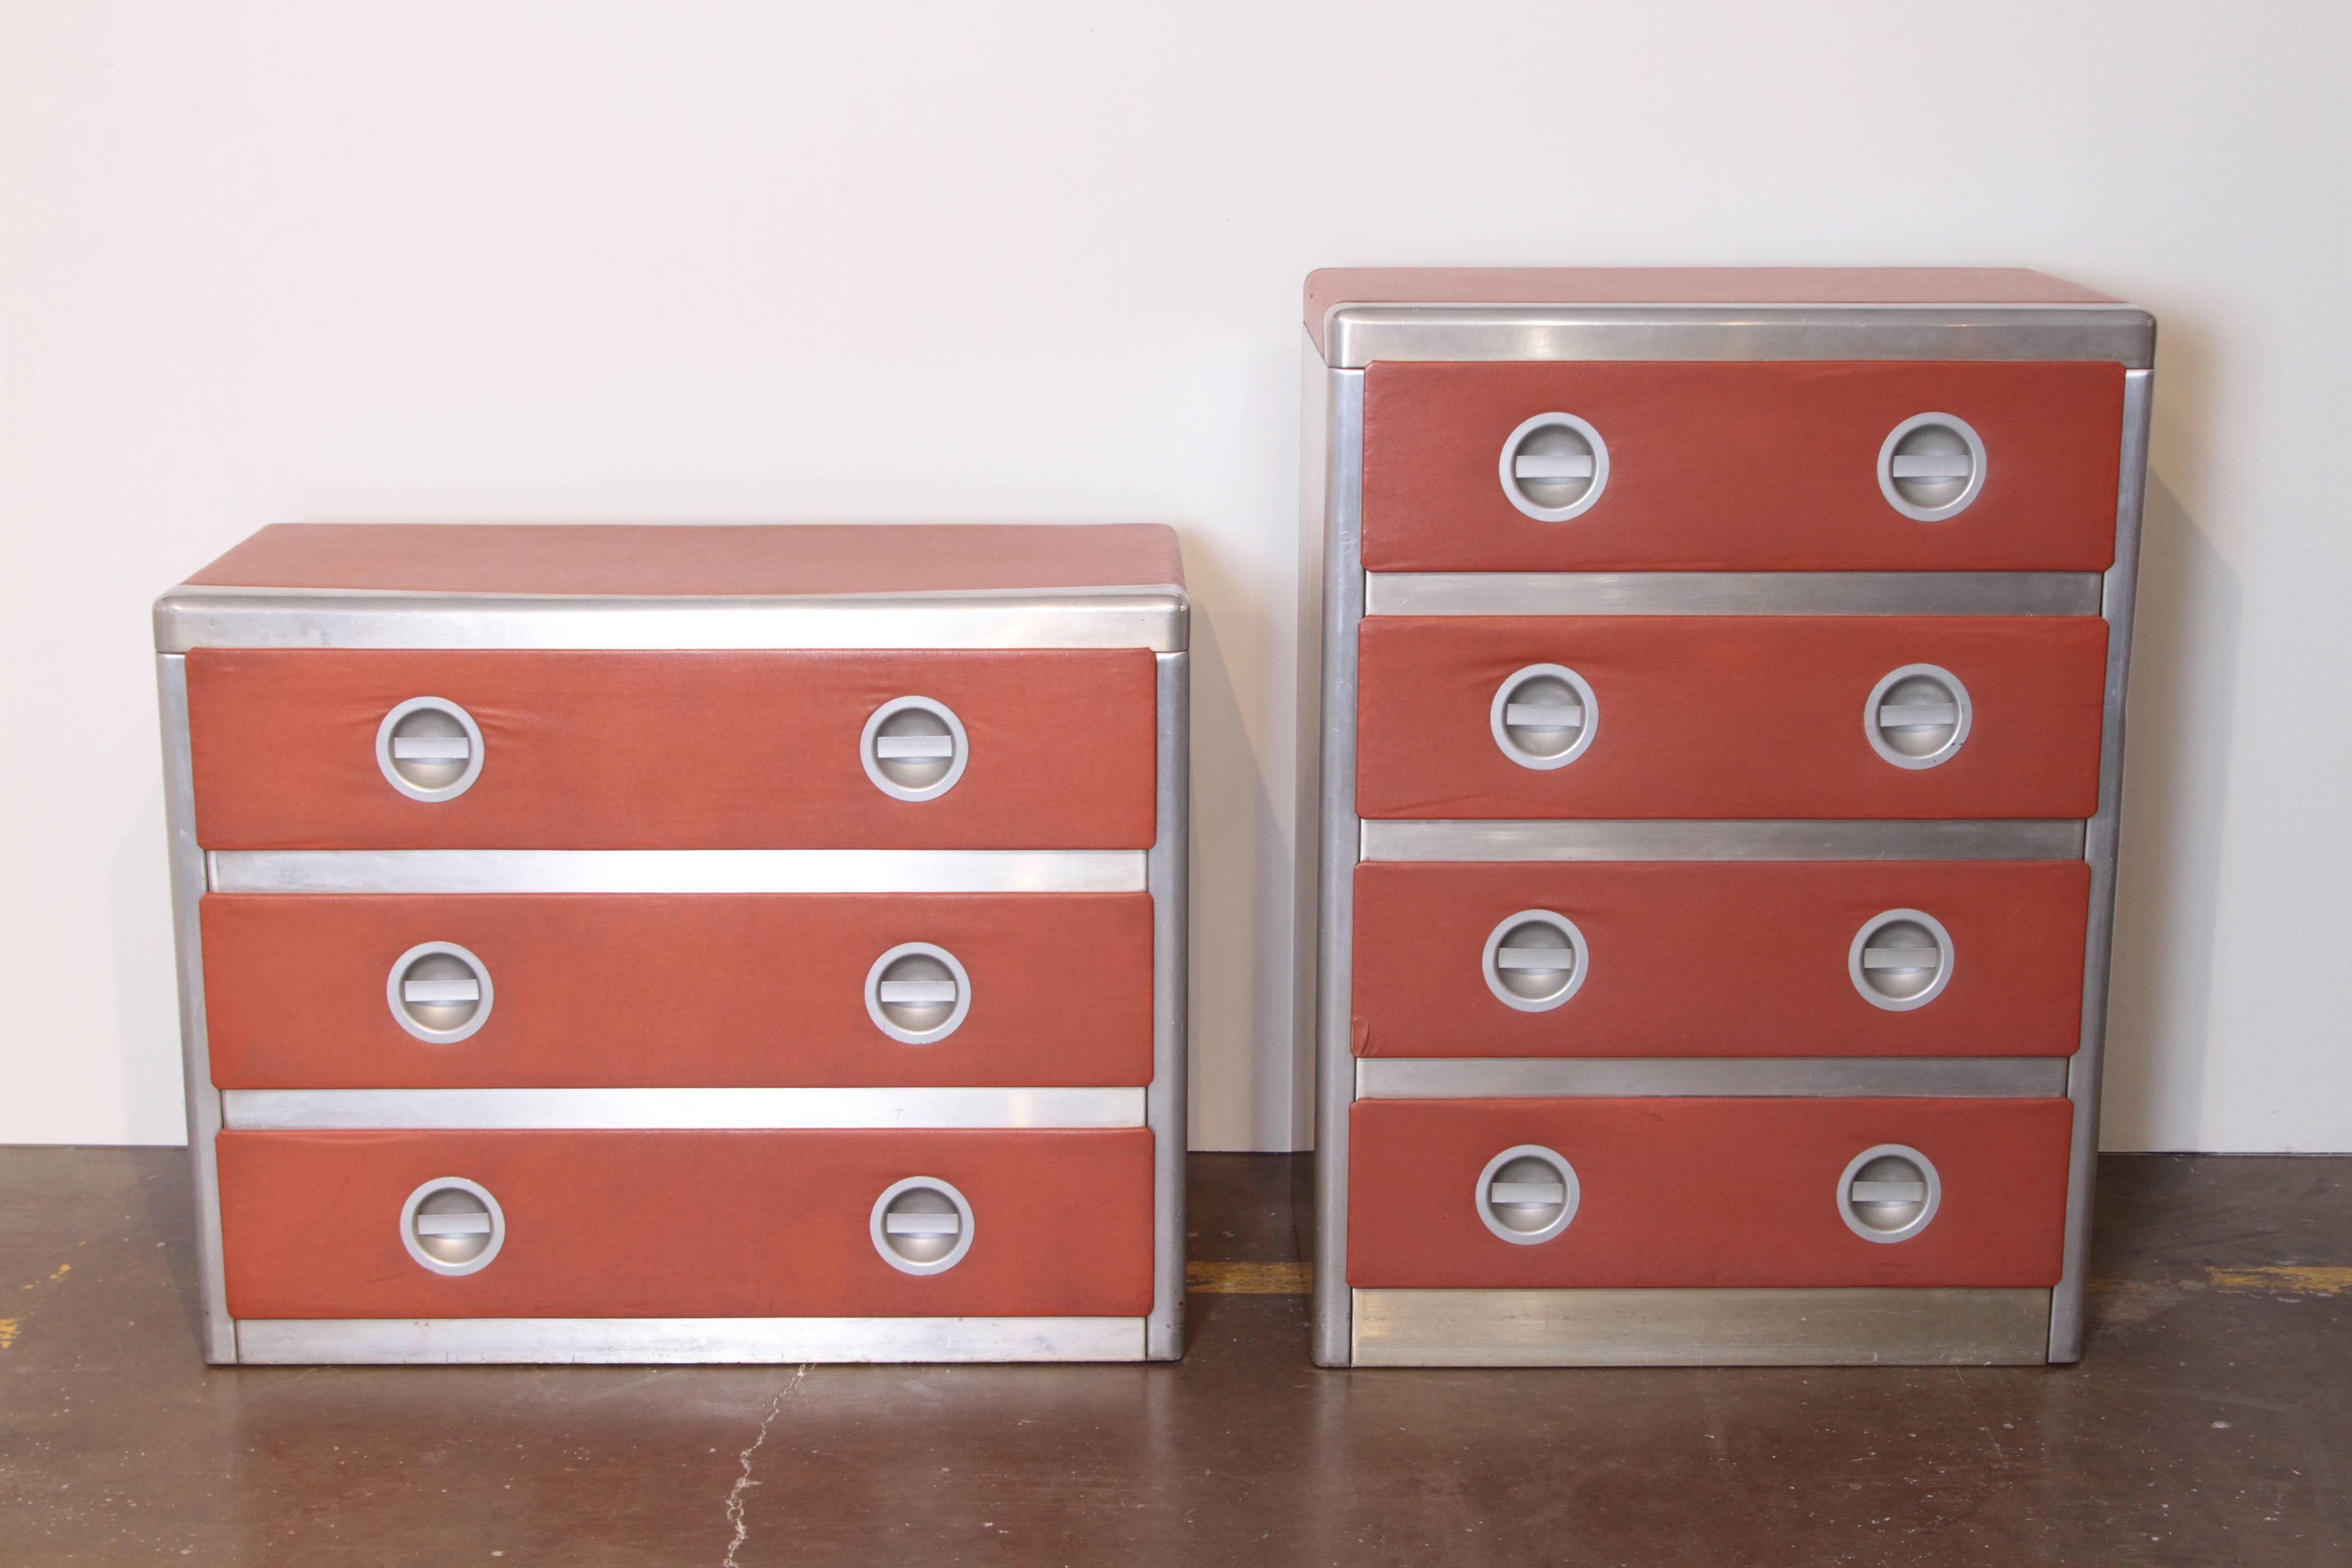 Machine Age Art Deco streamline matched pair of aluminum chests / dressers, Norman Bel Geddes attribution.  Streamlined.
PRICE REDUCED from $4900.  Second lowboy in black vinyl available.

Classic original U.S. Industrial design.
Light-weight